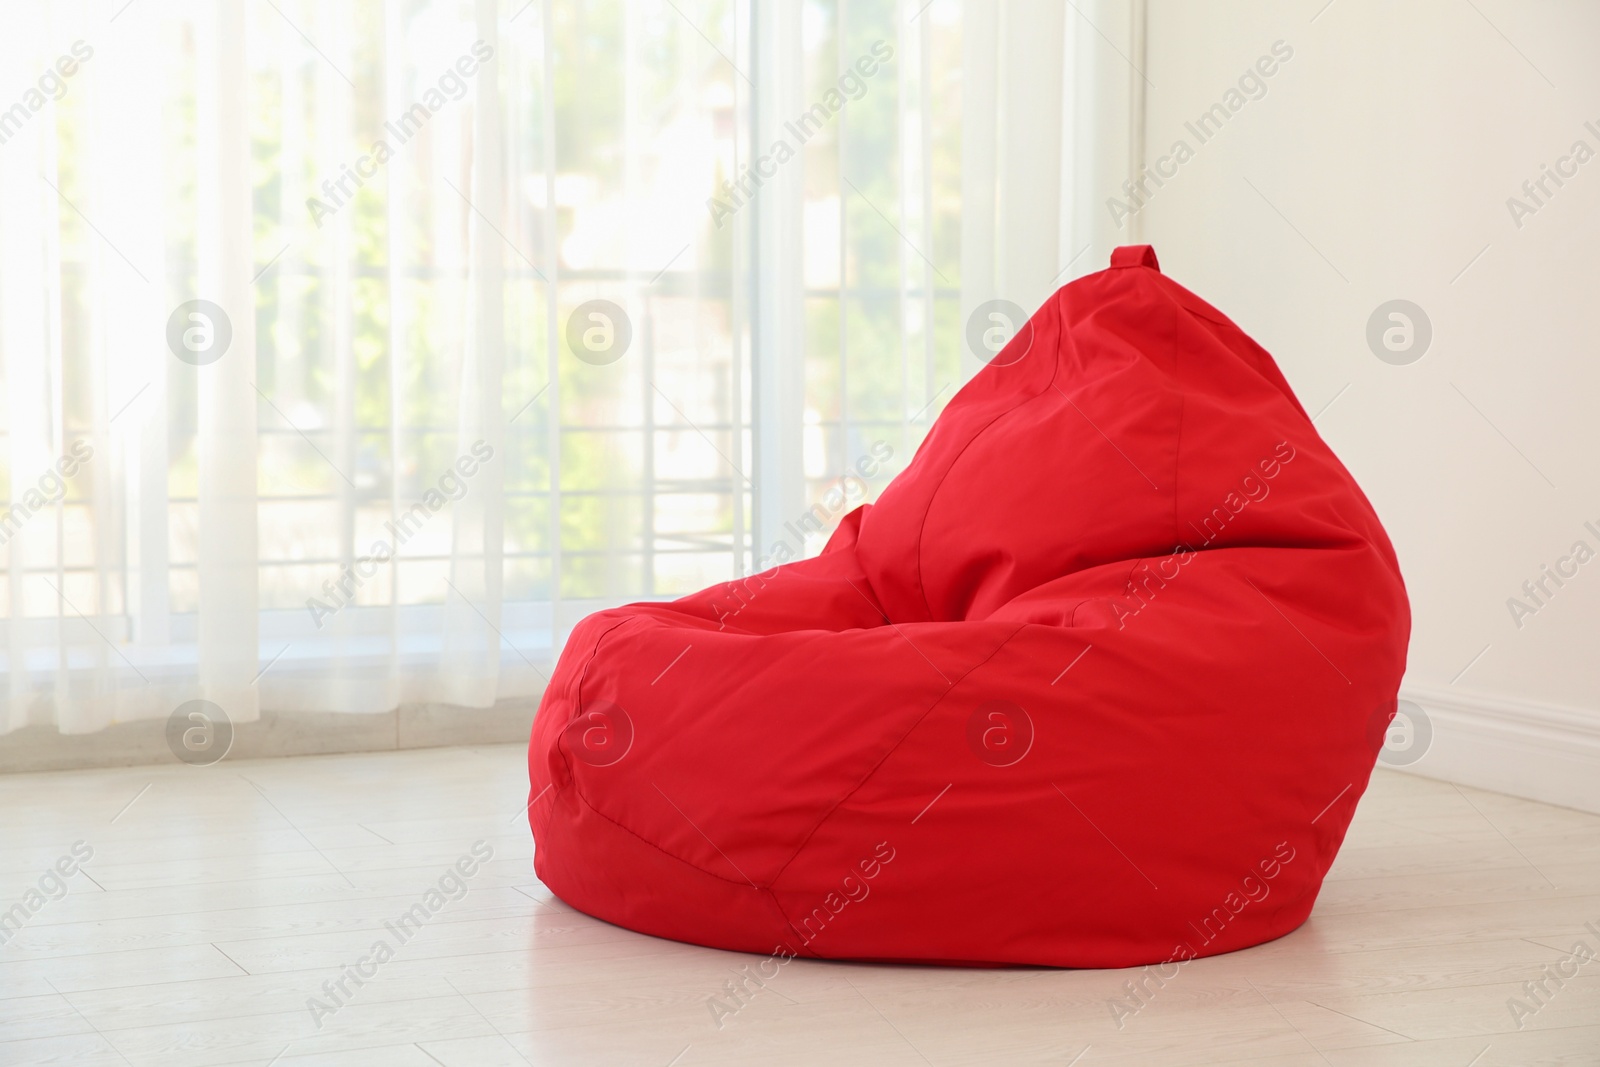 Photo of Red bean bag chair near window in room. Space for text